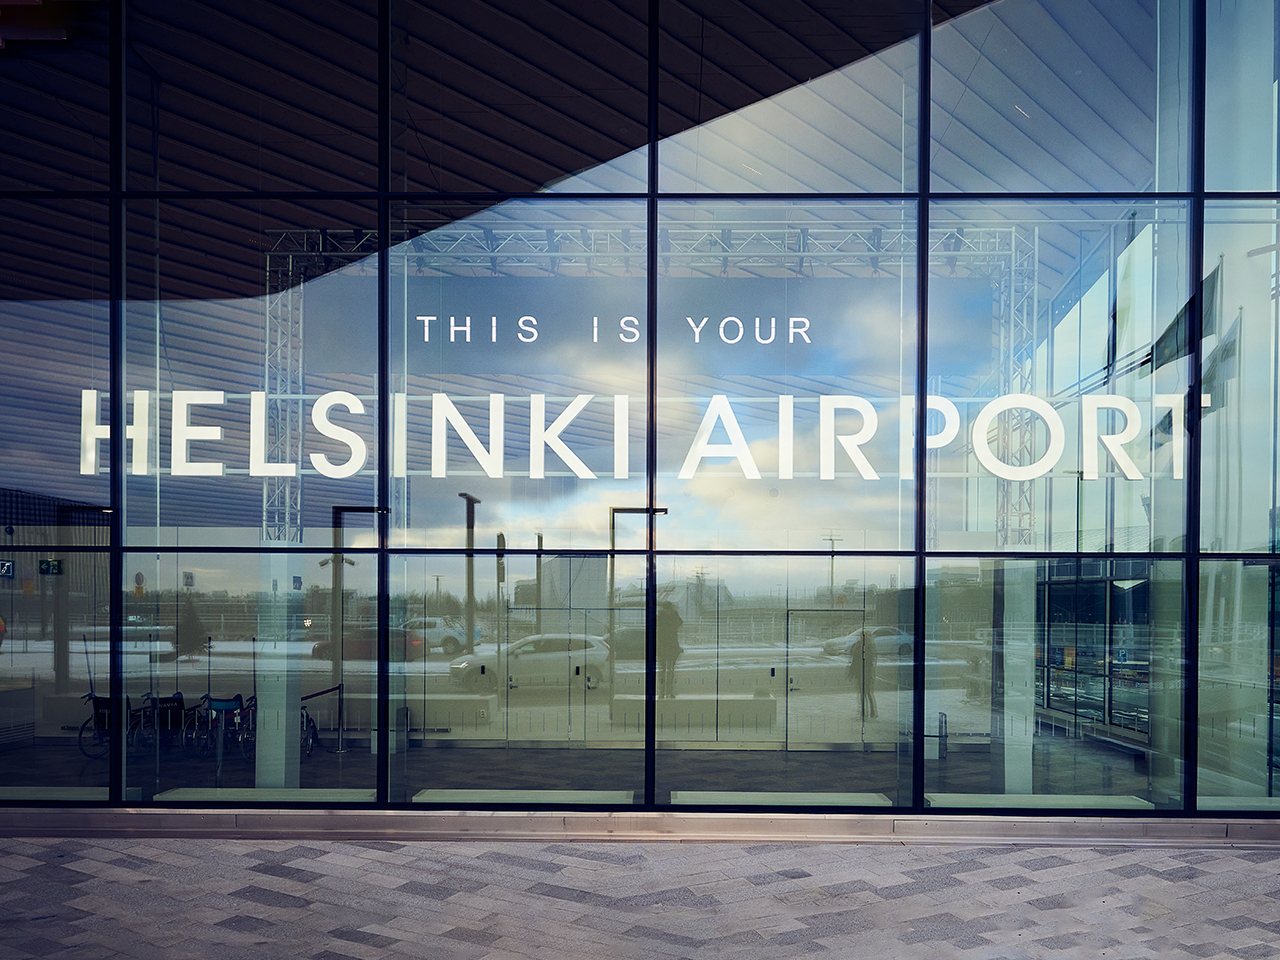 A world first: Finland’s biggest airport names itself after all its visitors